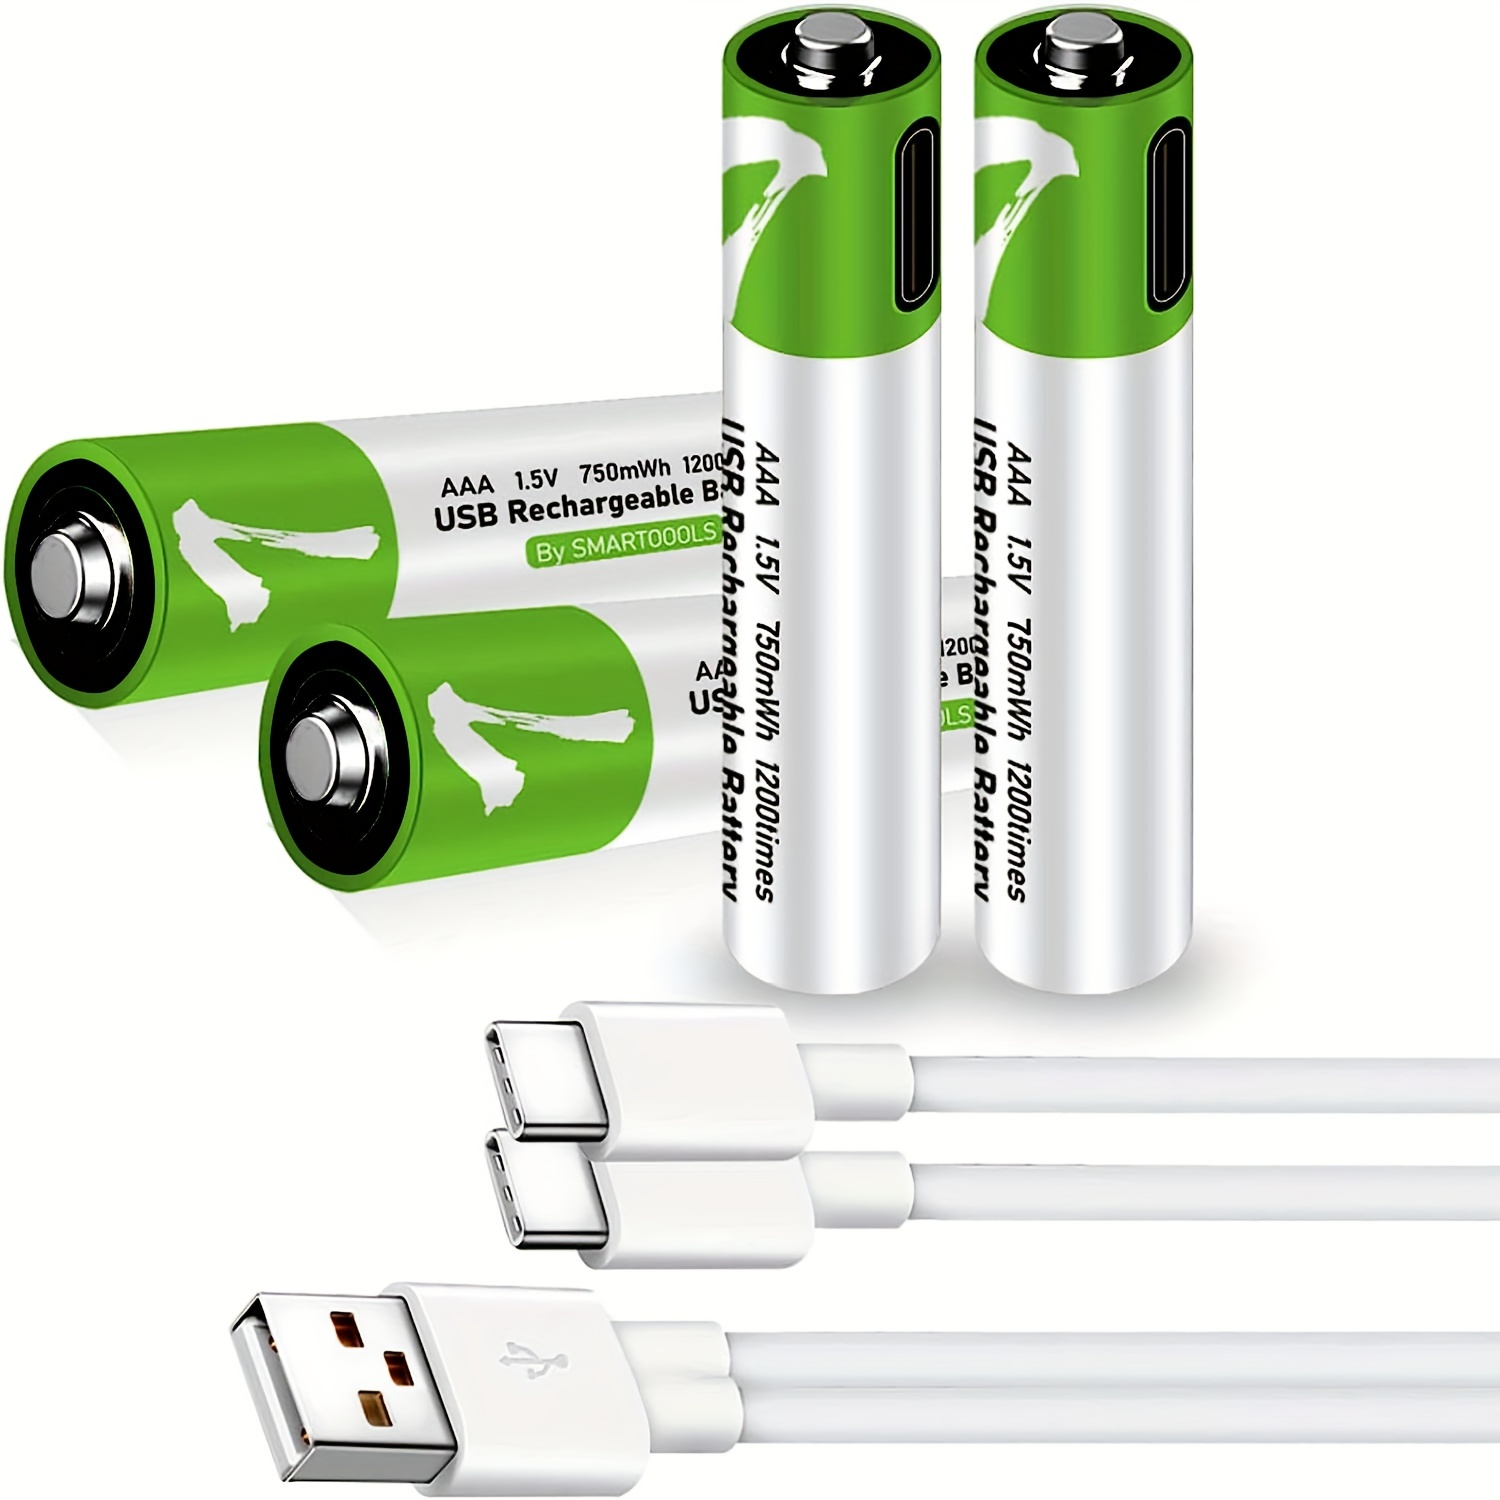 rechargeable battery 1.5v aaa usb battery Type-c fast charging lithium  battery pilas aaa recargables